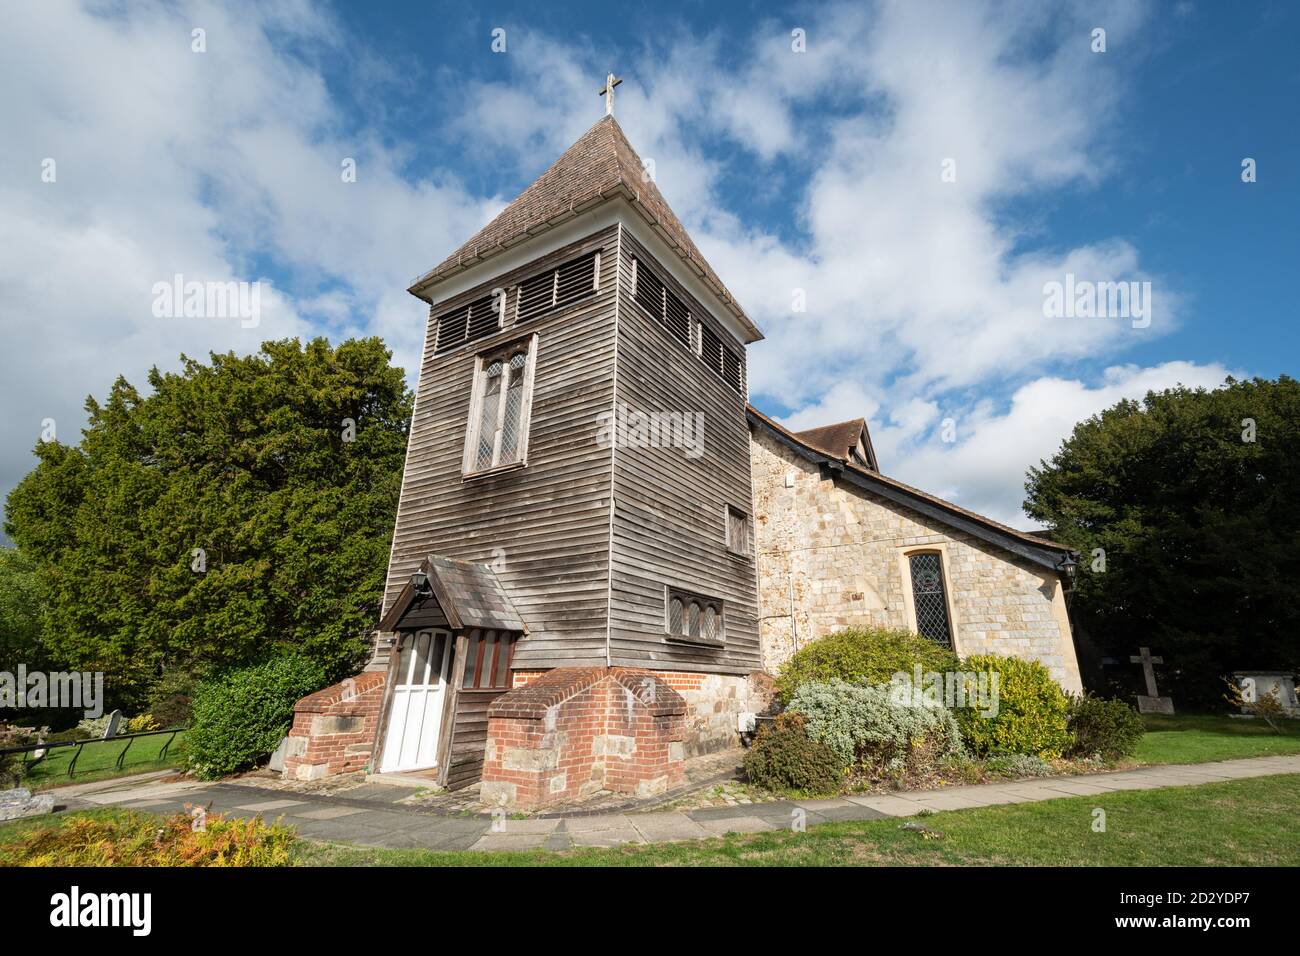 St Peters Church, dating back to the Norman period, in Farnborough, Hampshire, UK Stock Photo